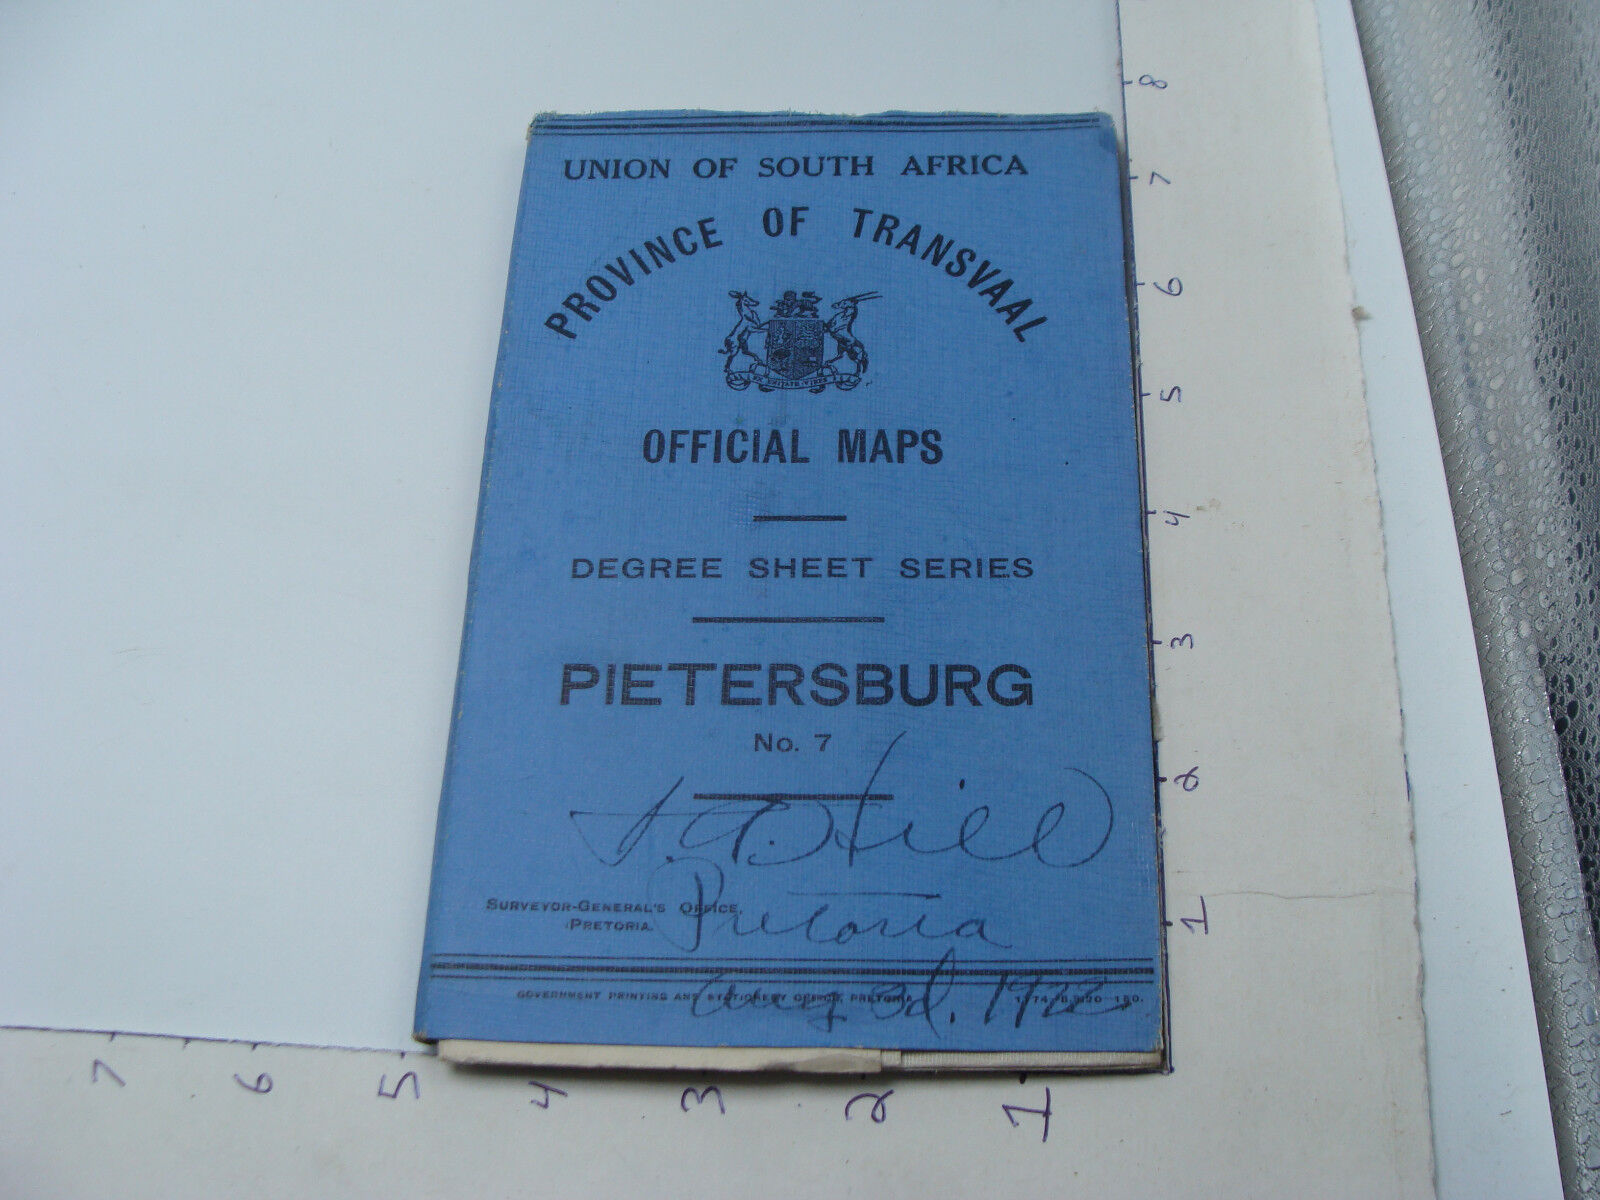 1922 Union of South Africa - Procince of Transvall Official Map -- PIETERSBURG